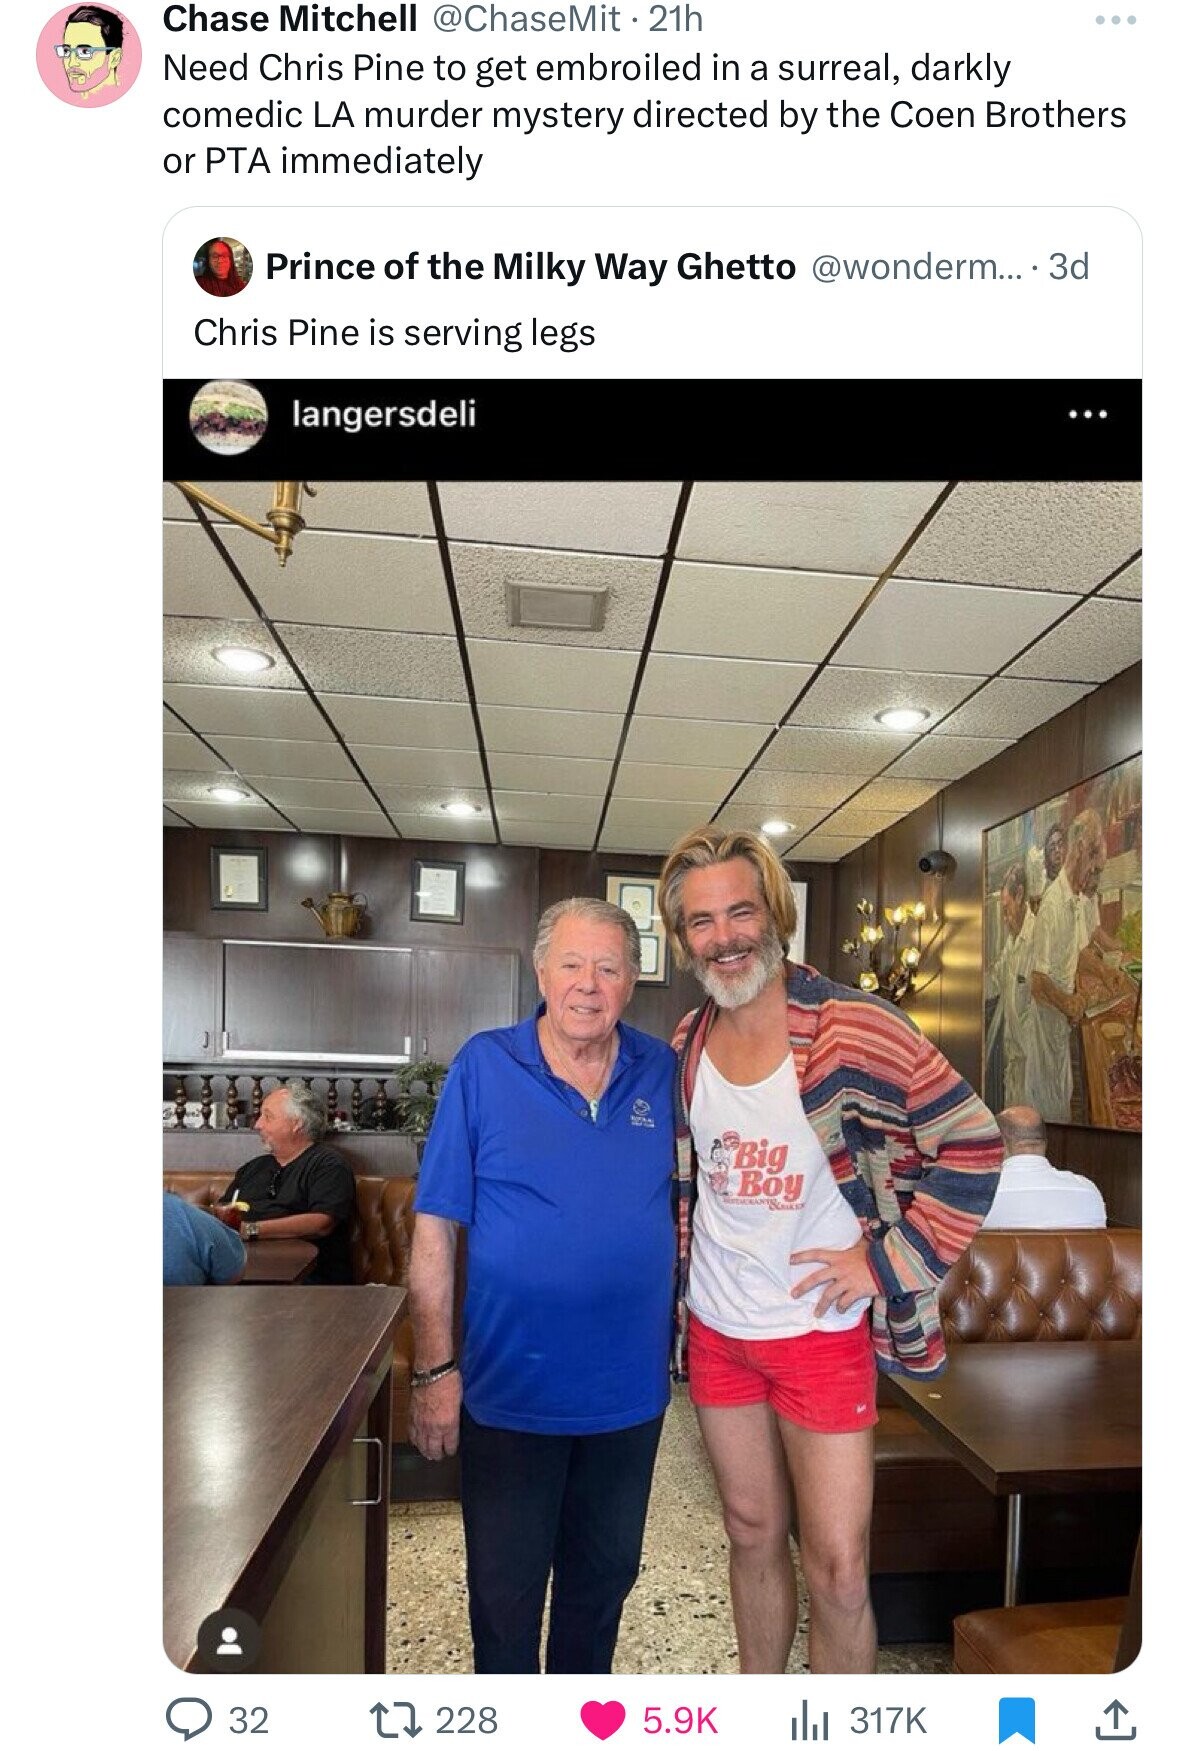 Chase Mitchell @ChaseMit . 21h ... Need Chris Pine to get embroiled in a surreal, darkly comedic LA murder mystery directed by the Coen Brothers or PTA immediately Prince of the Milky Way Ghetto @wonderm... . . 3d Chris Pine is serving legs langersdeli Big Boy 32 228 5.9K 317K 